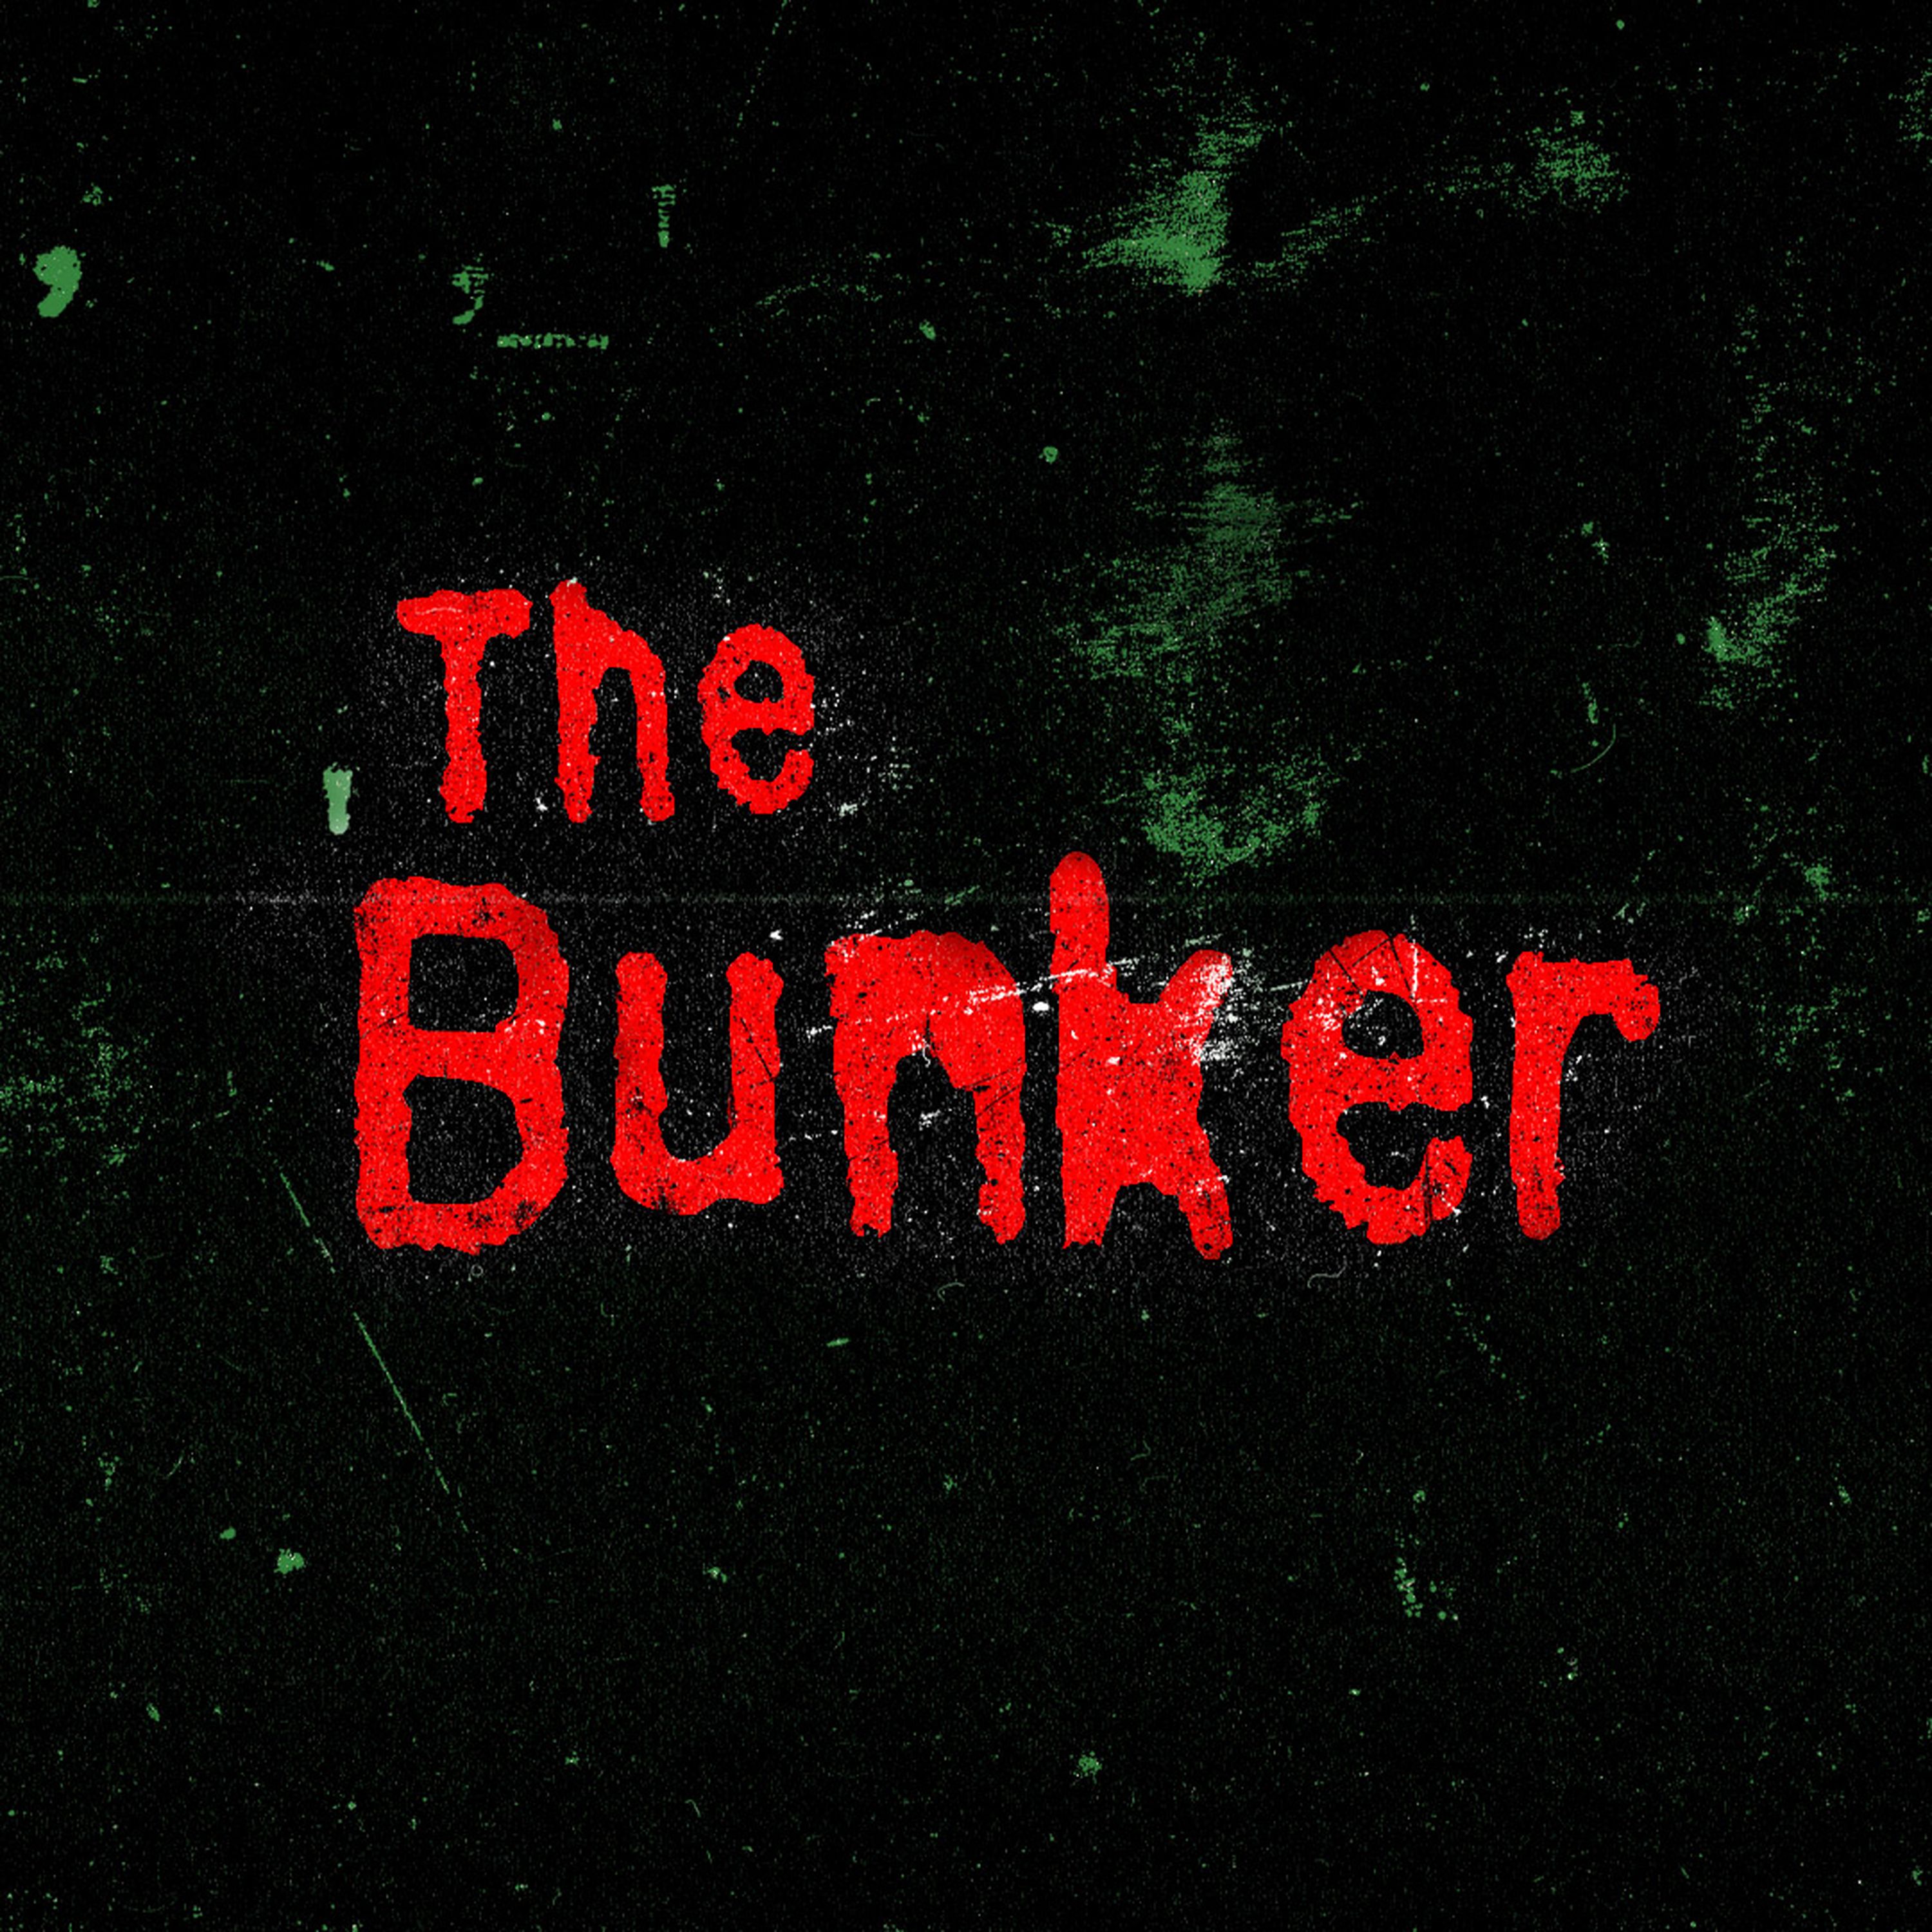 Special Episode - A Very Bunker Christmas